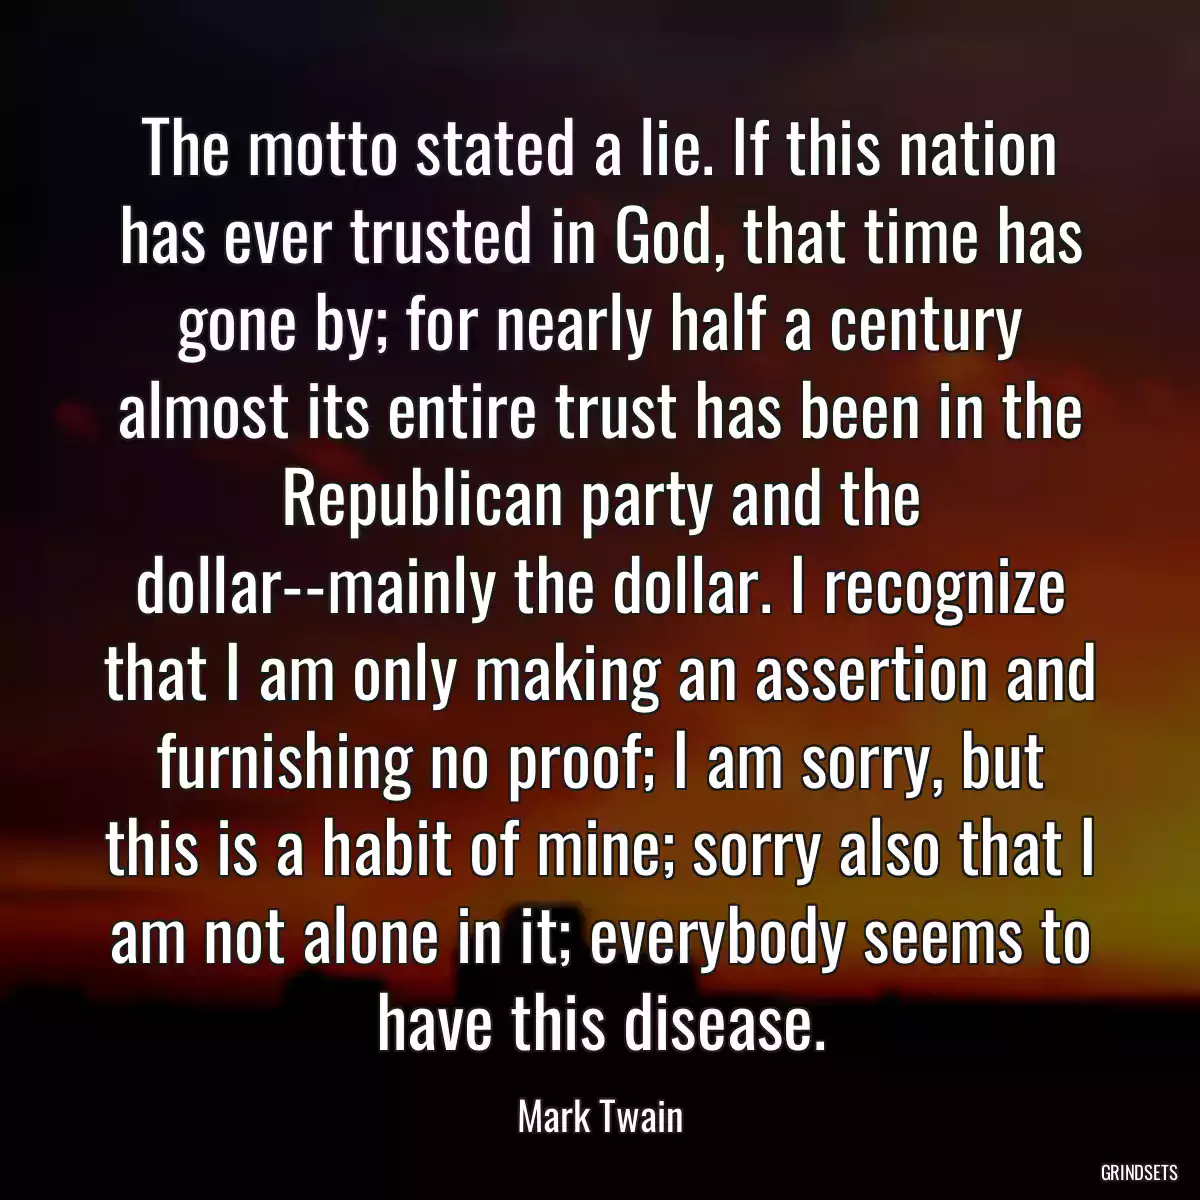 The motto stated a lie. If this nation has ever trusted in God, that time has gone by; for nearly half a century almost its entire trust has been in the Republican party and the dollar--mainly the dollar. I recognize that I am only making an assertion and furnishing no proof; I am sorry, but this is a habit of mine; sorry also that I am not alone in it; everybody seems to have this disease.